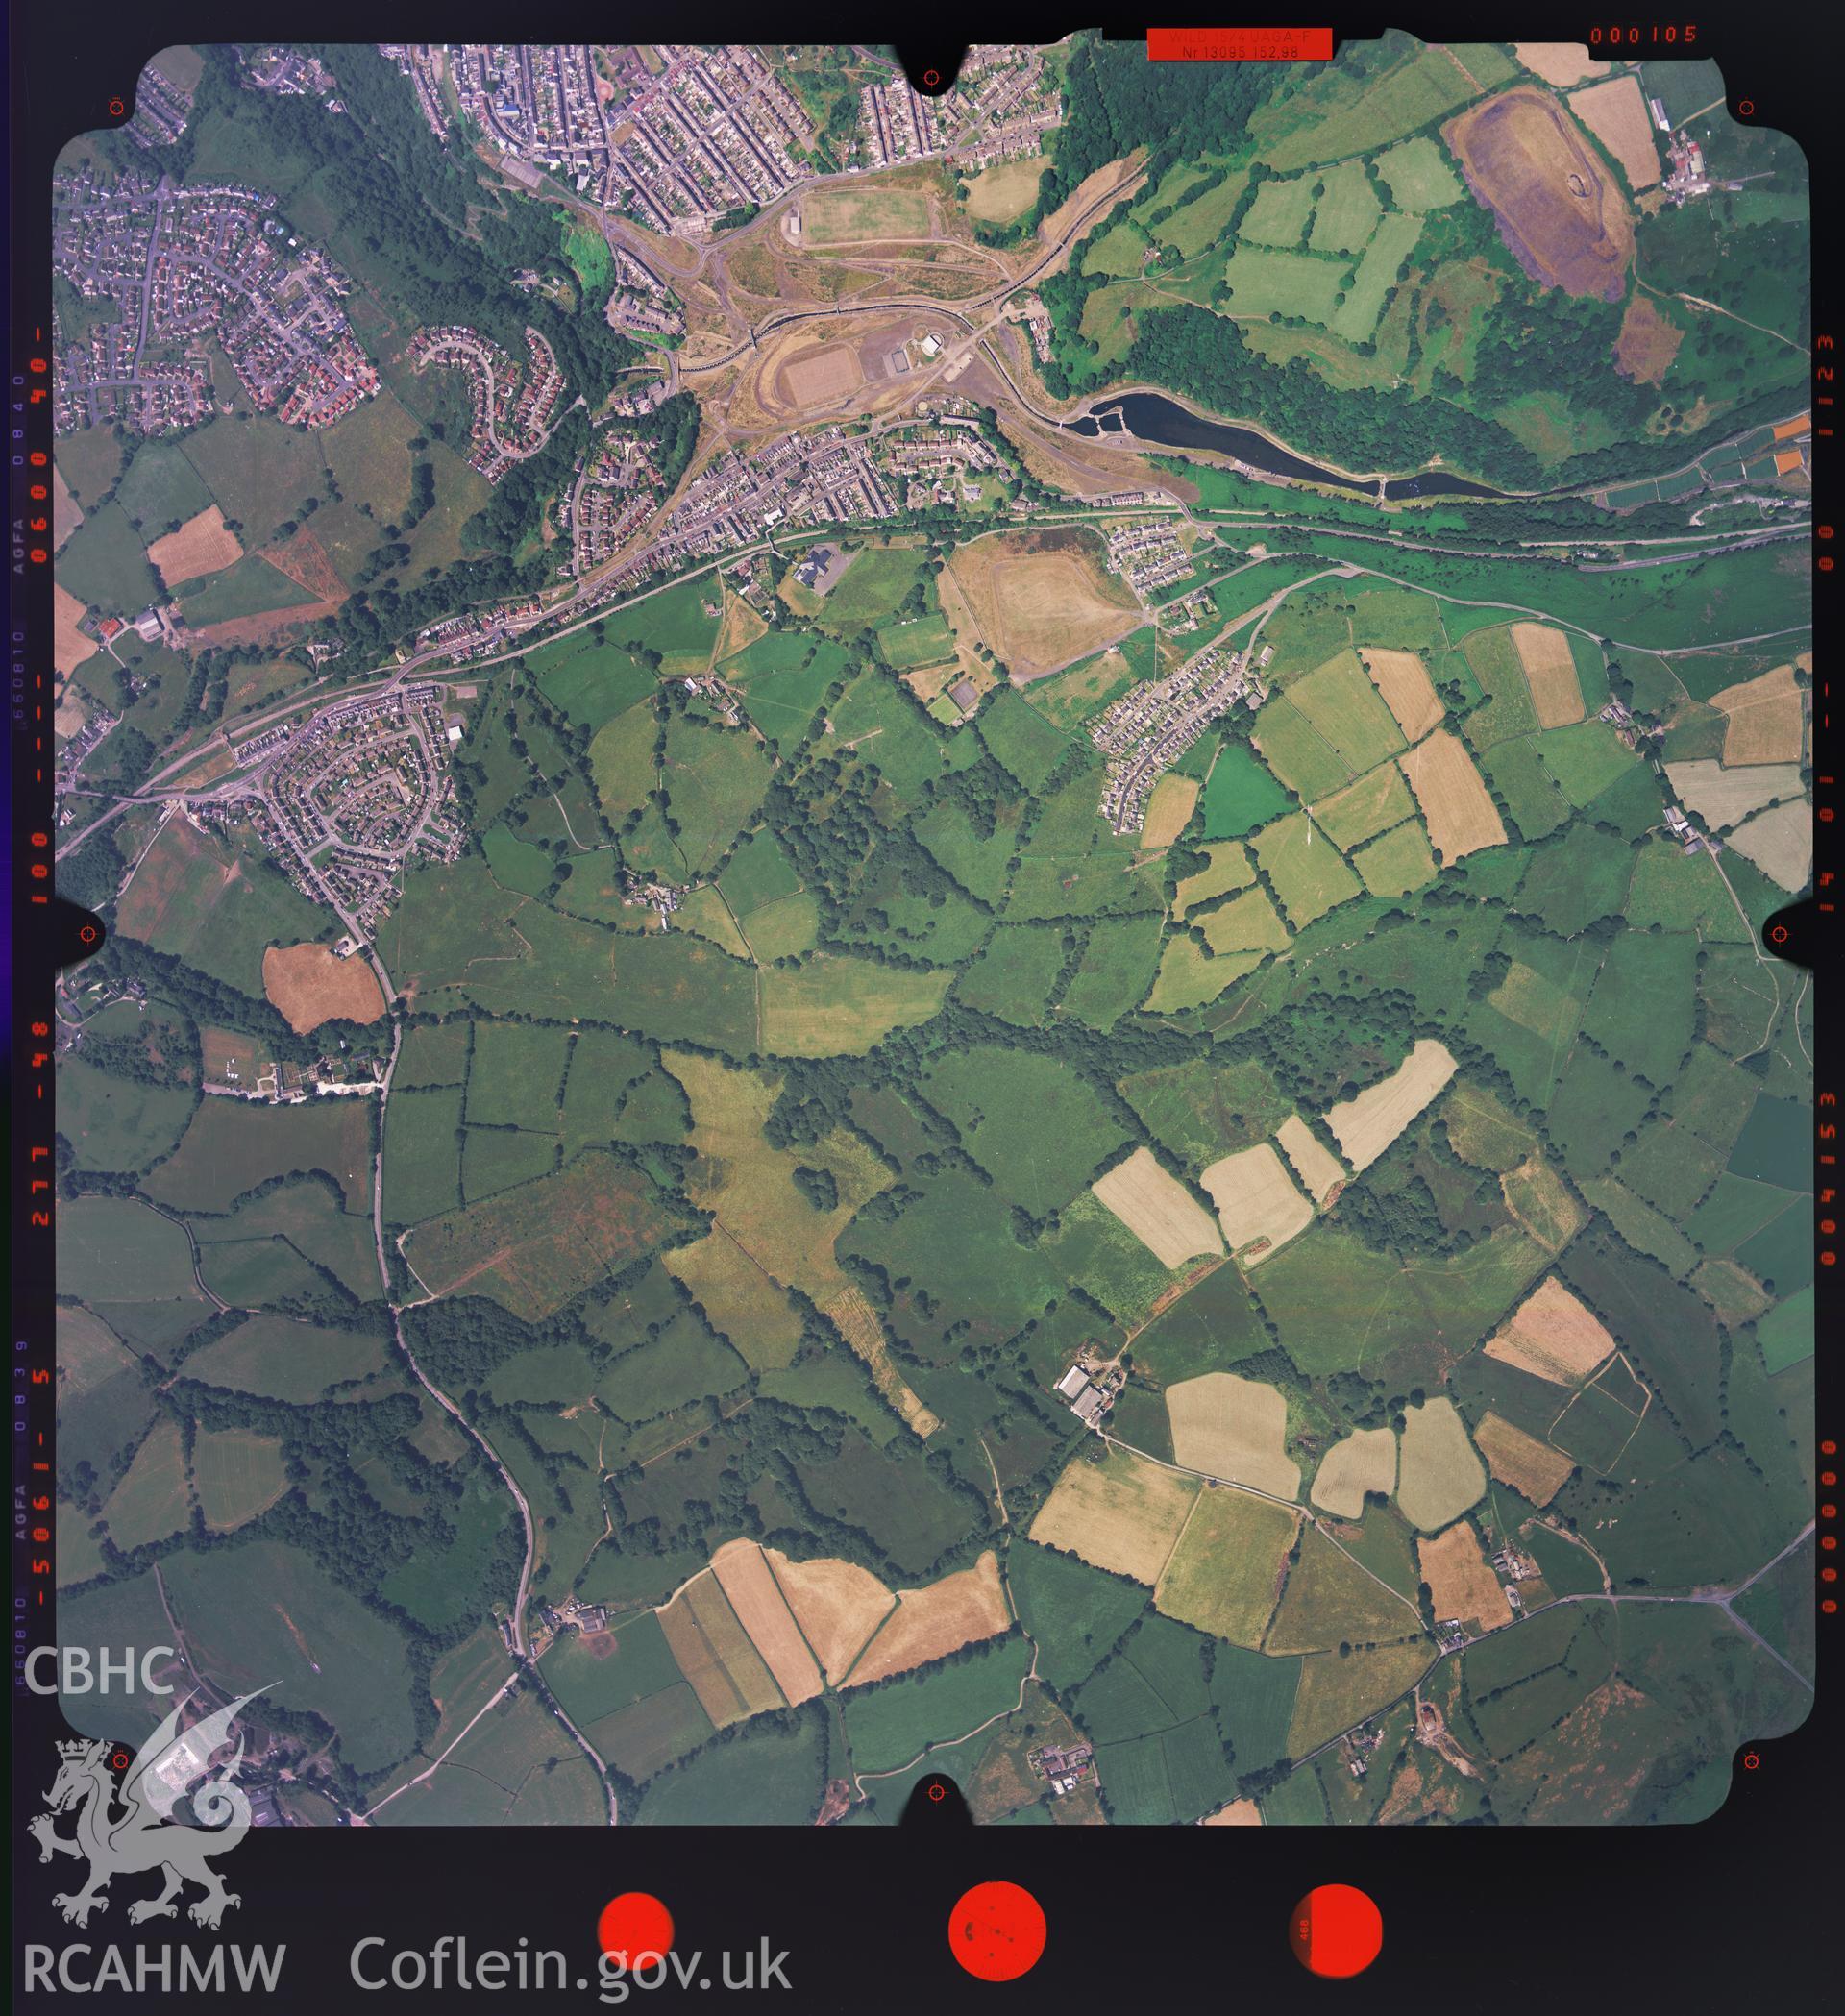 Digitized copy of a colour aerial photograph showing the area around Gelligaer Common, taken by Ordnance Survey, 2003.